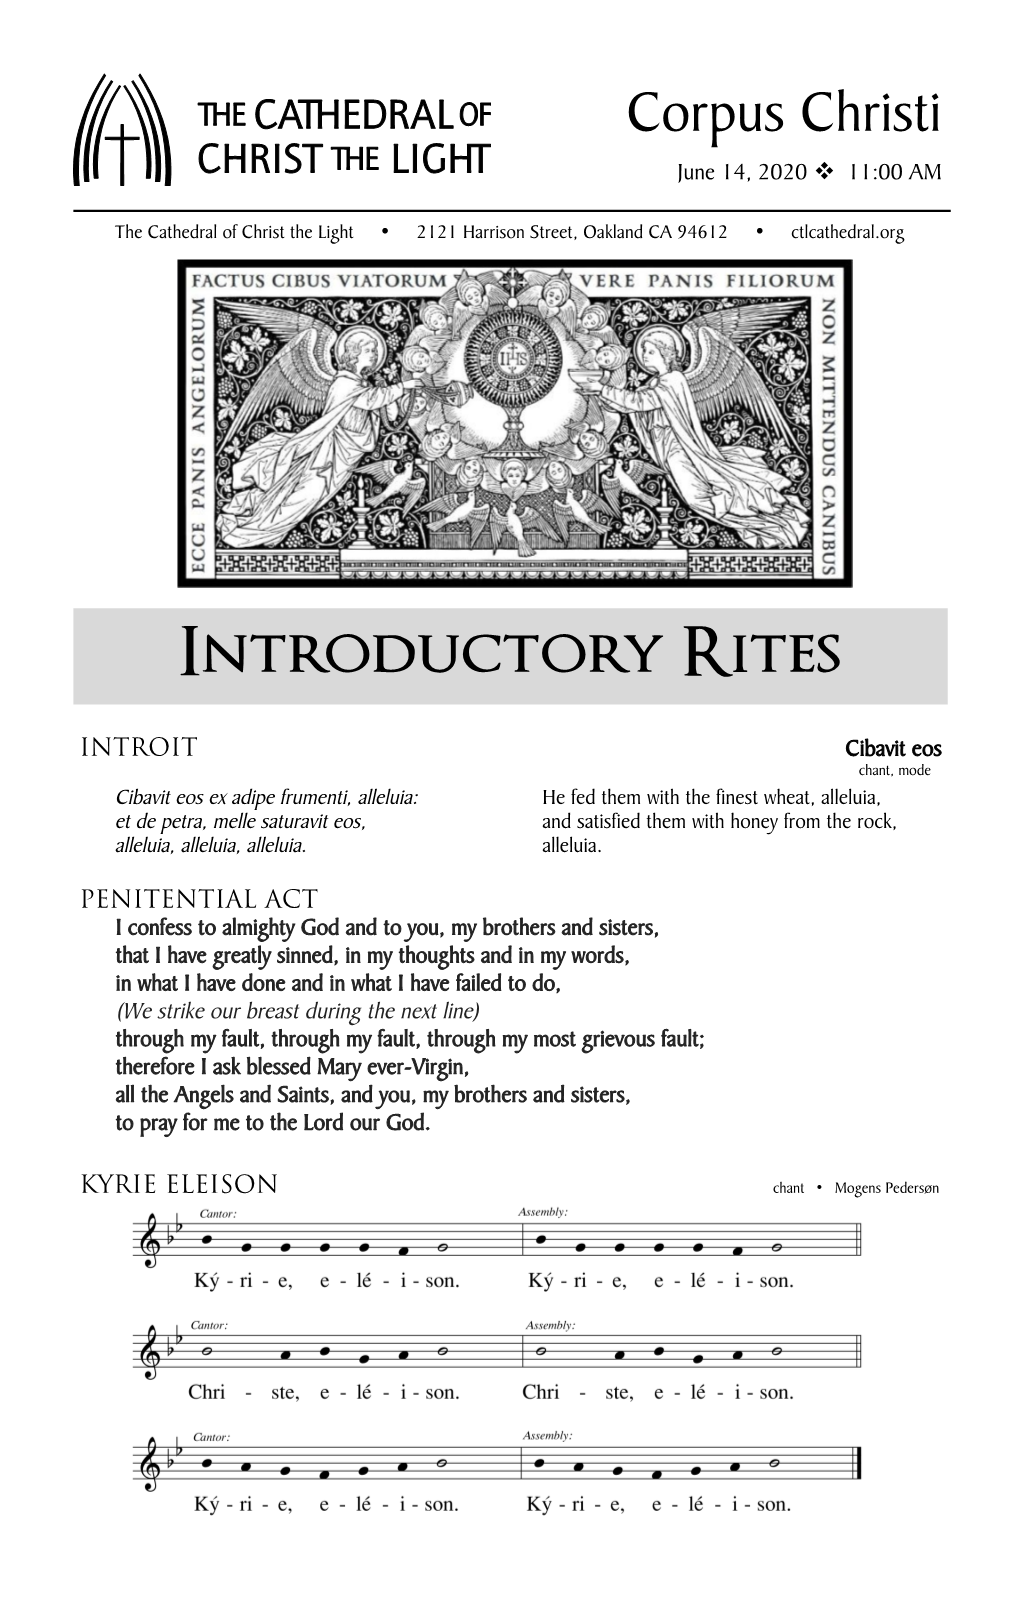 Introductory Rites